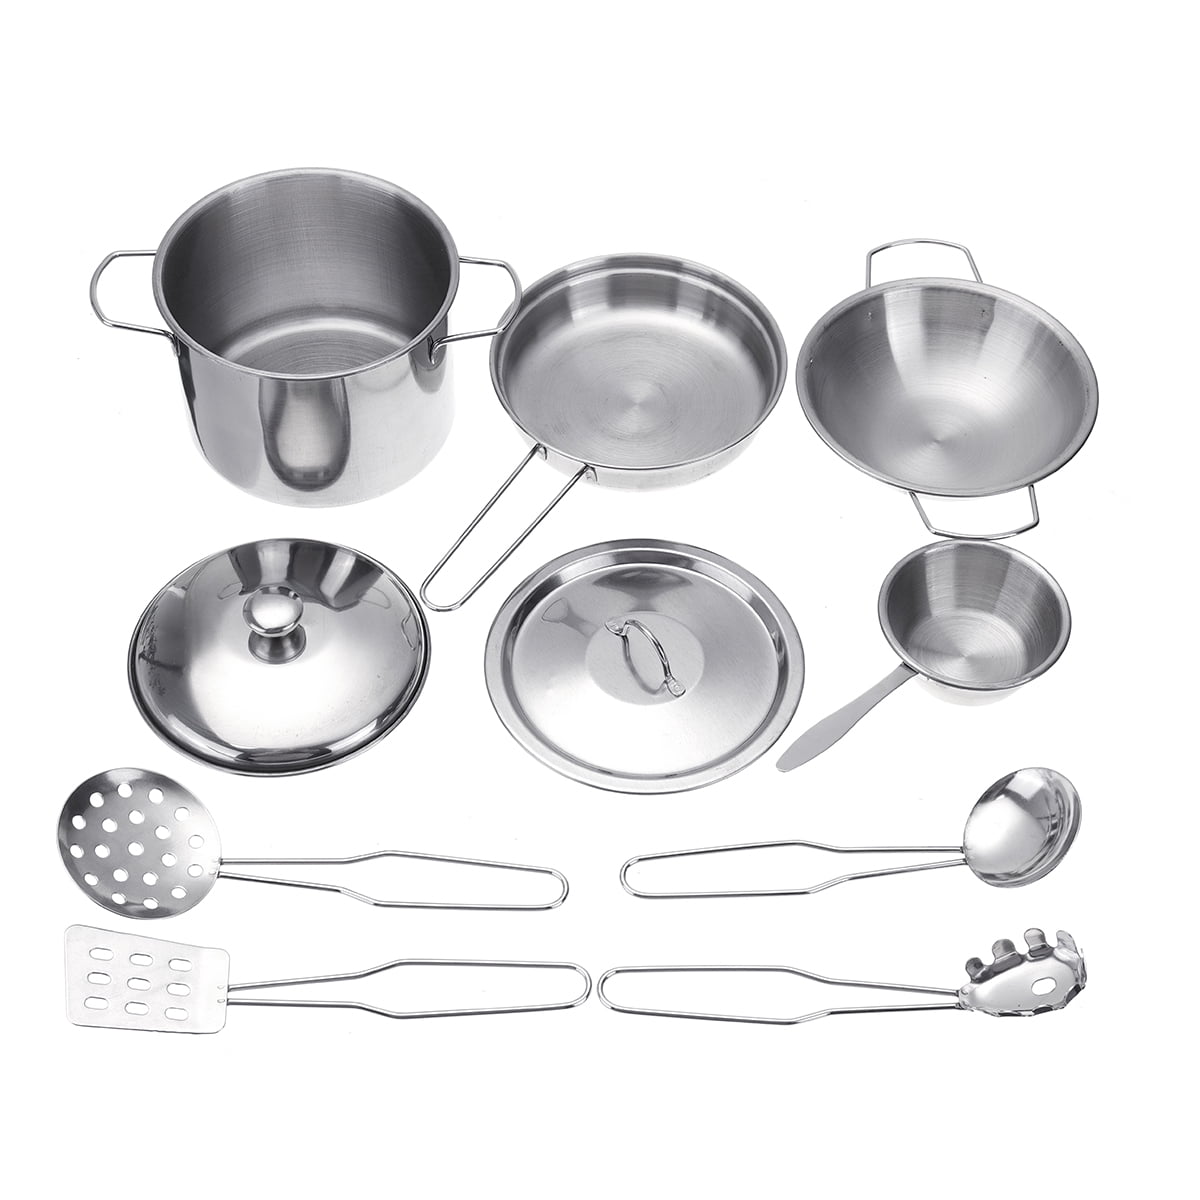 23 PCs Pretend Play Toys W/ Stainless Steel Cookware Pots &Pans Set For Toddlers